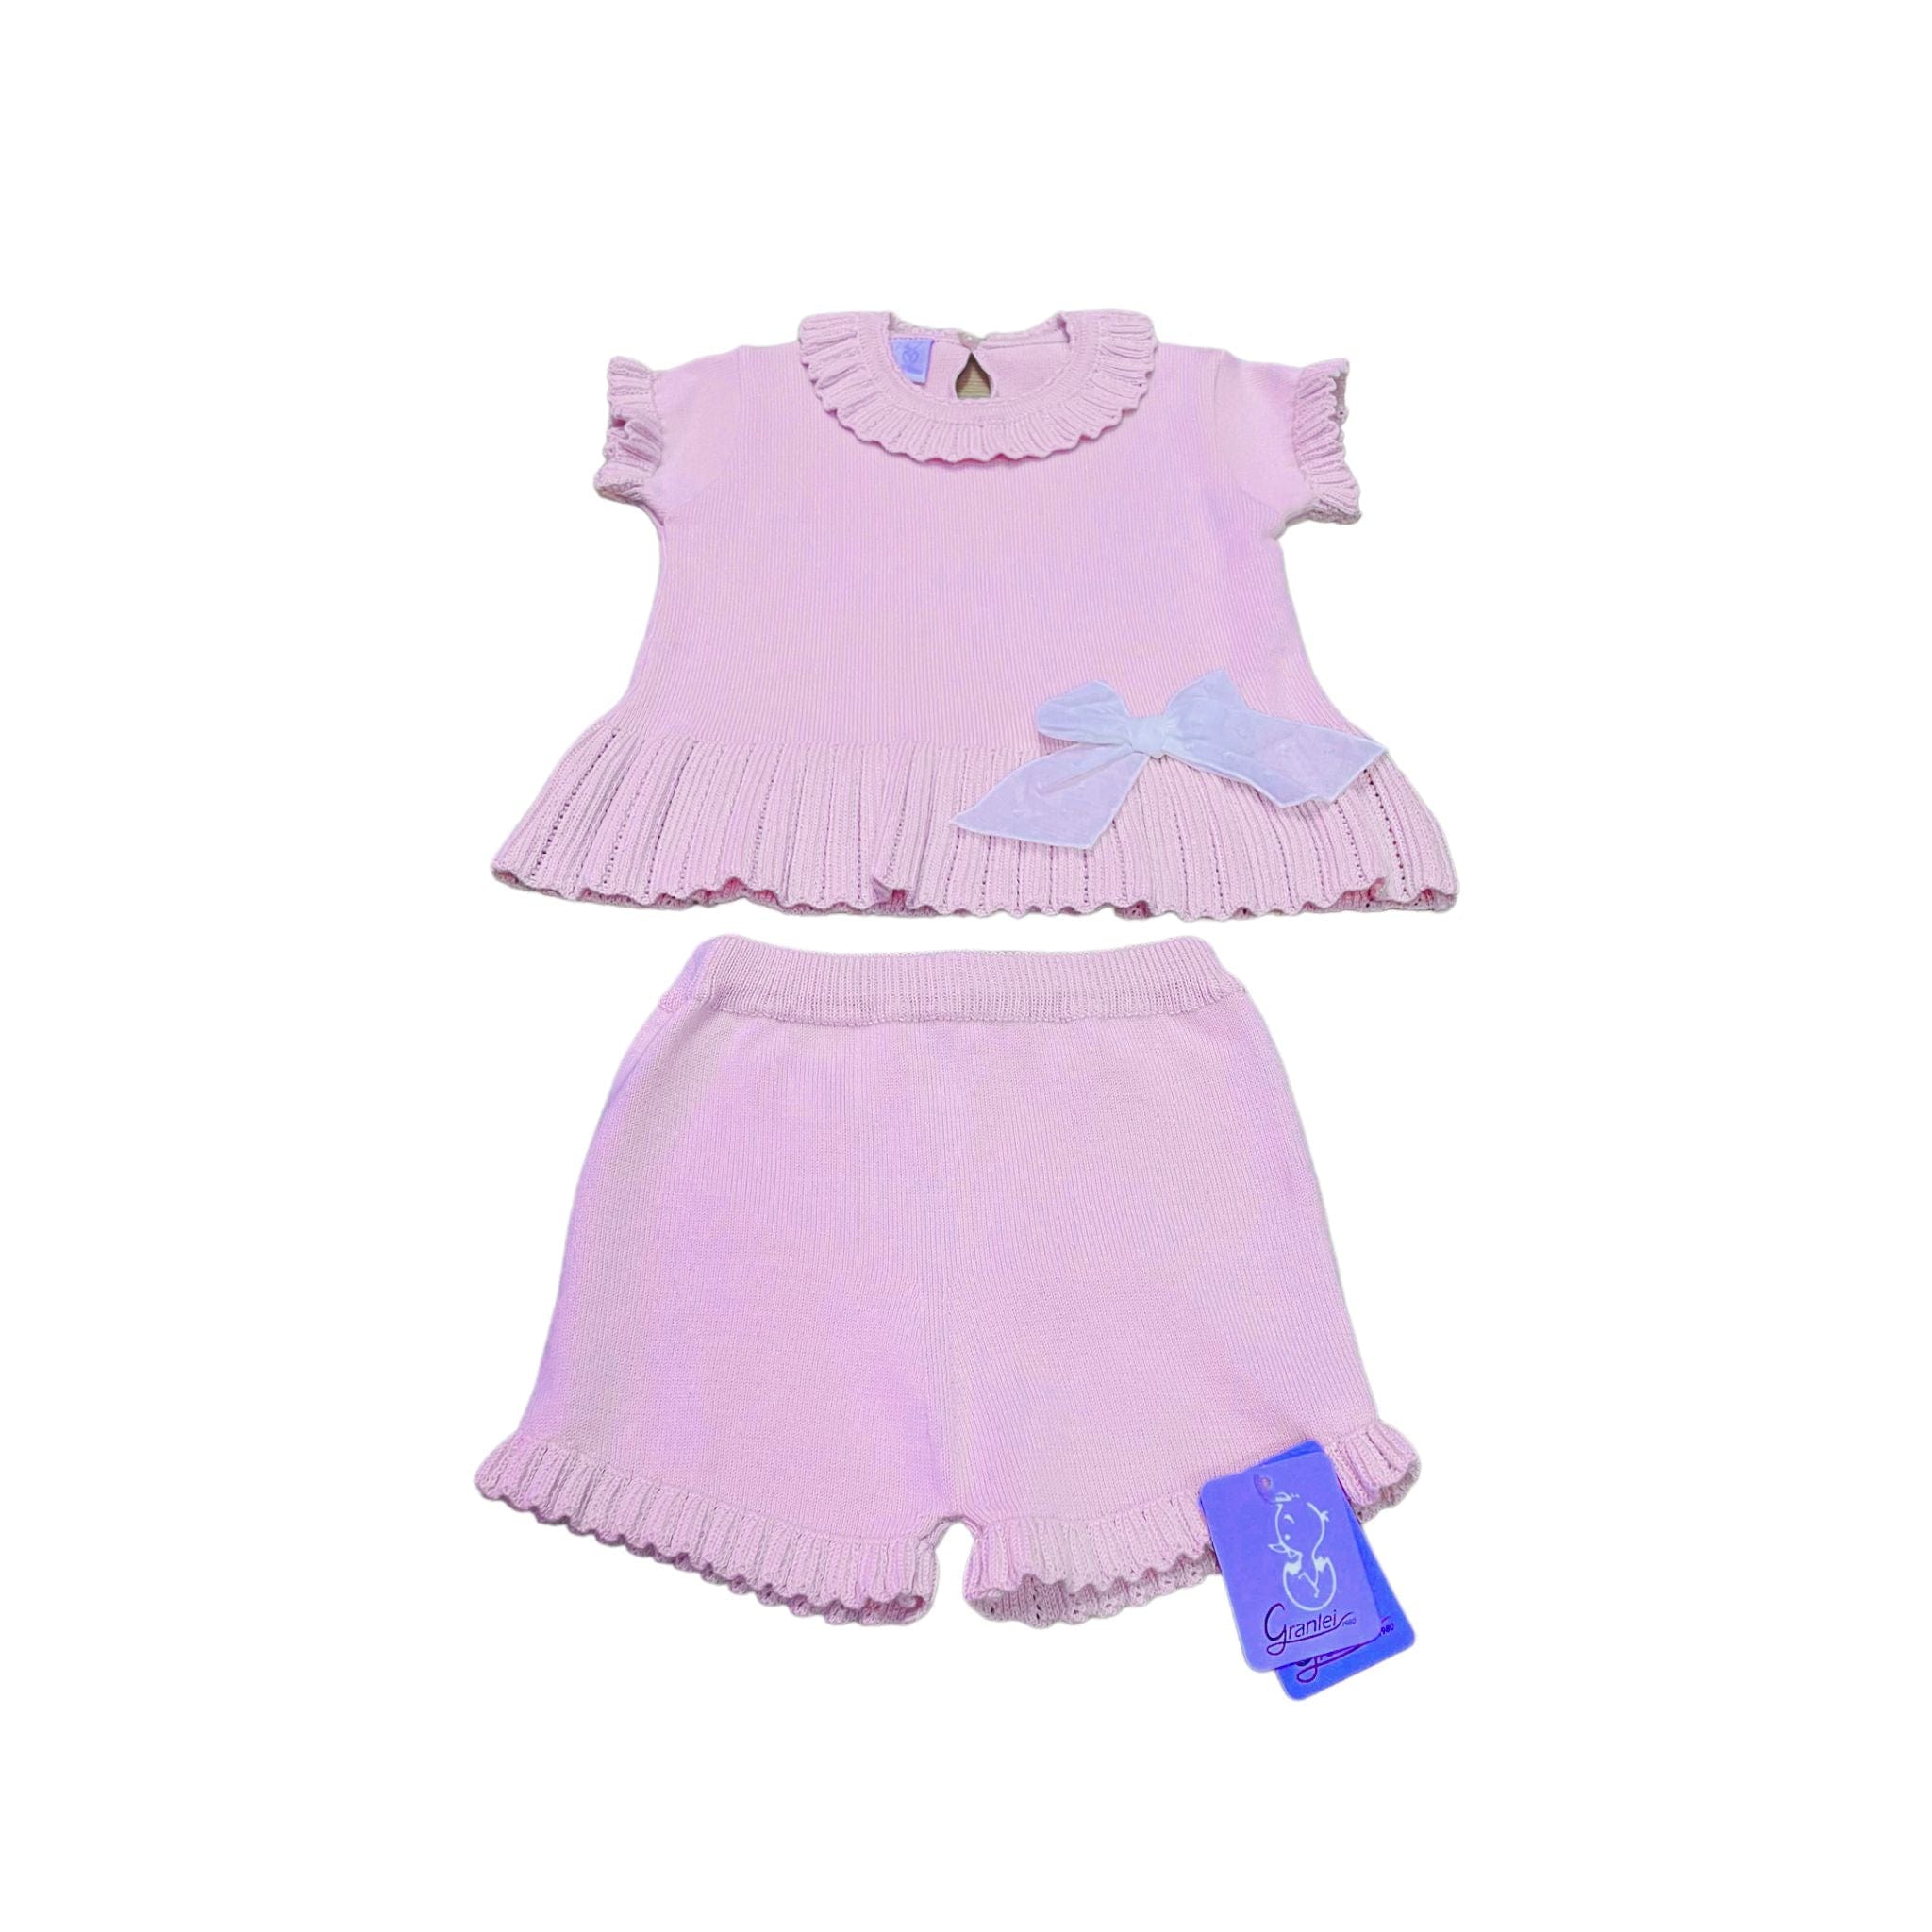 Artesania Granlei Girls Pink Knitted Outfit